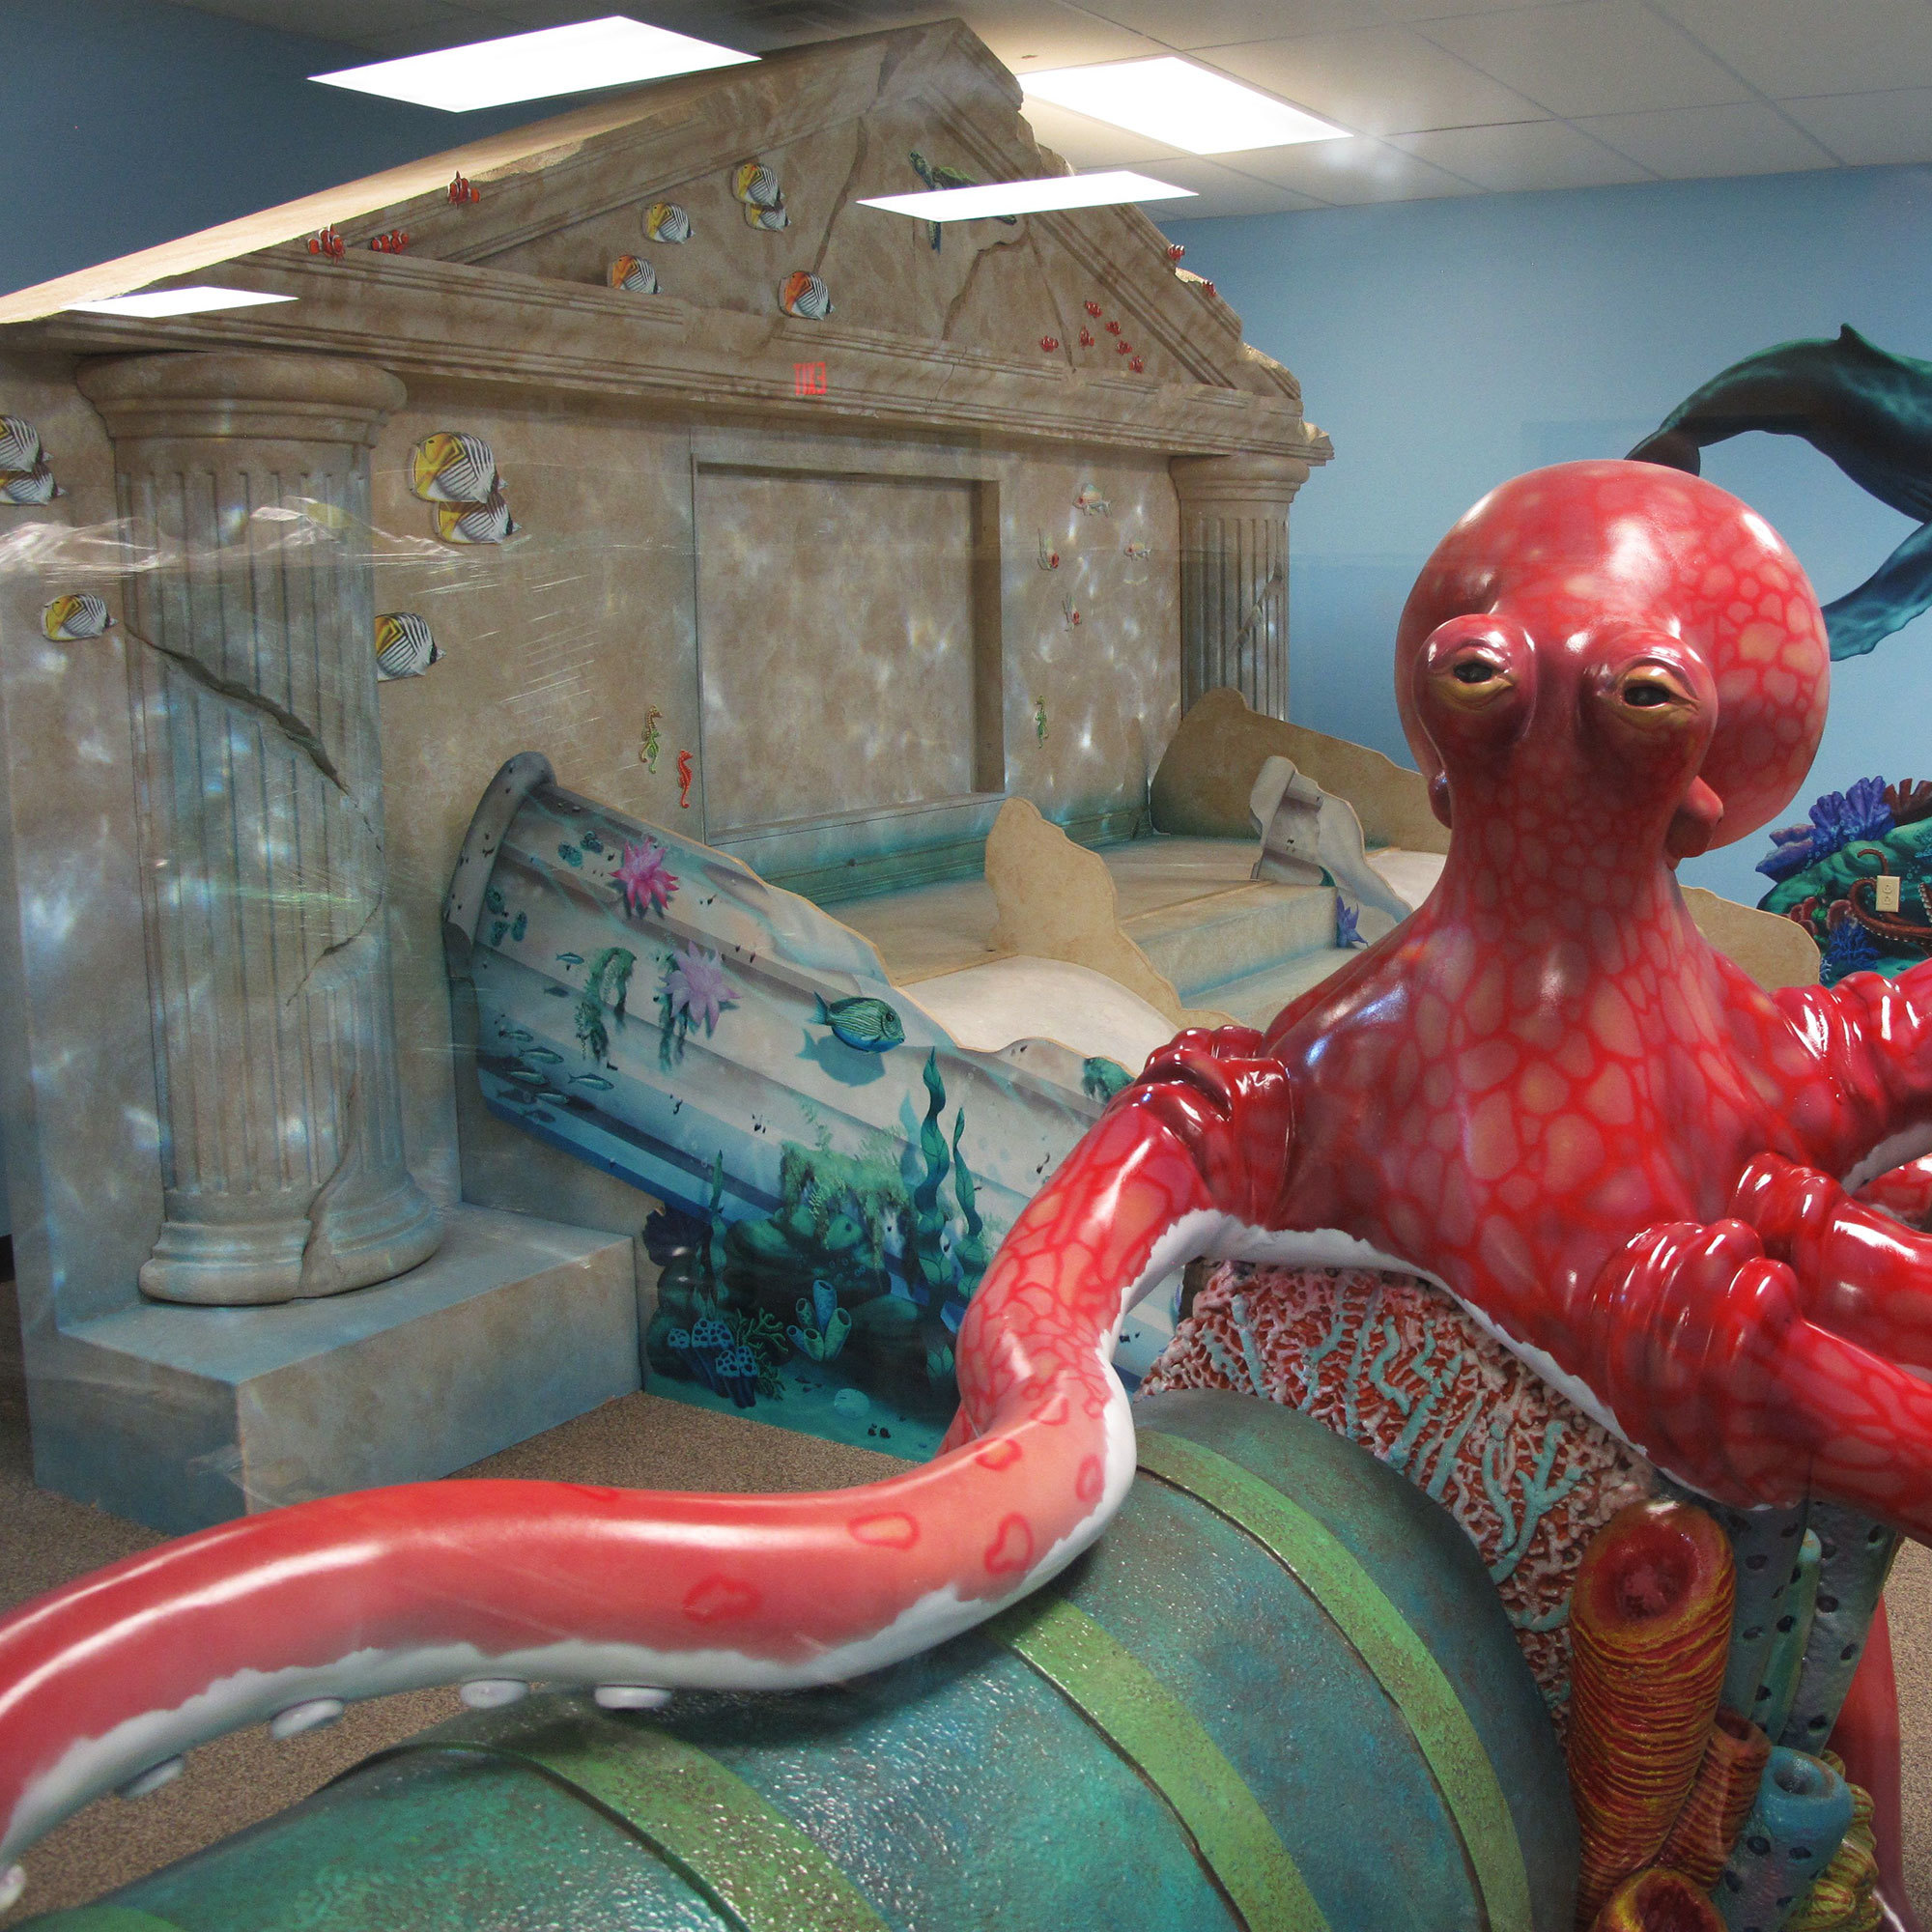 Undersea and Lost City of Atlantis Themed Play Area with giant 3D sculpted octopus and fallen column and Arch facade from Atlantis.